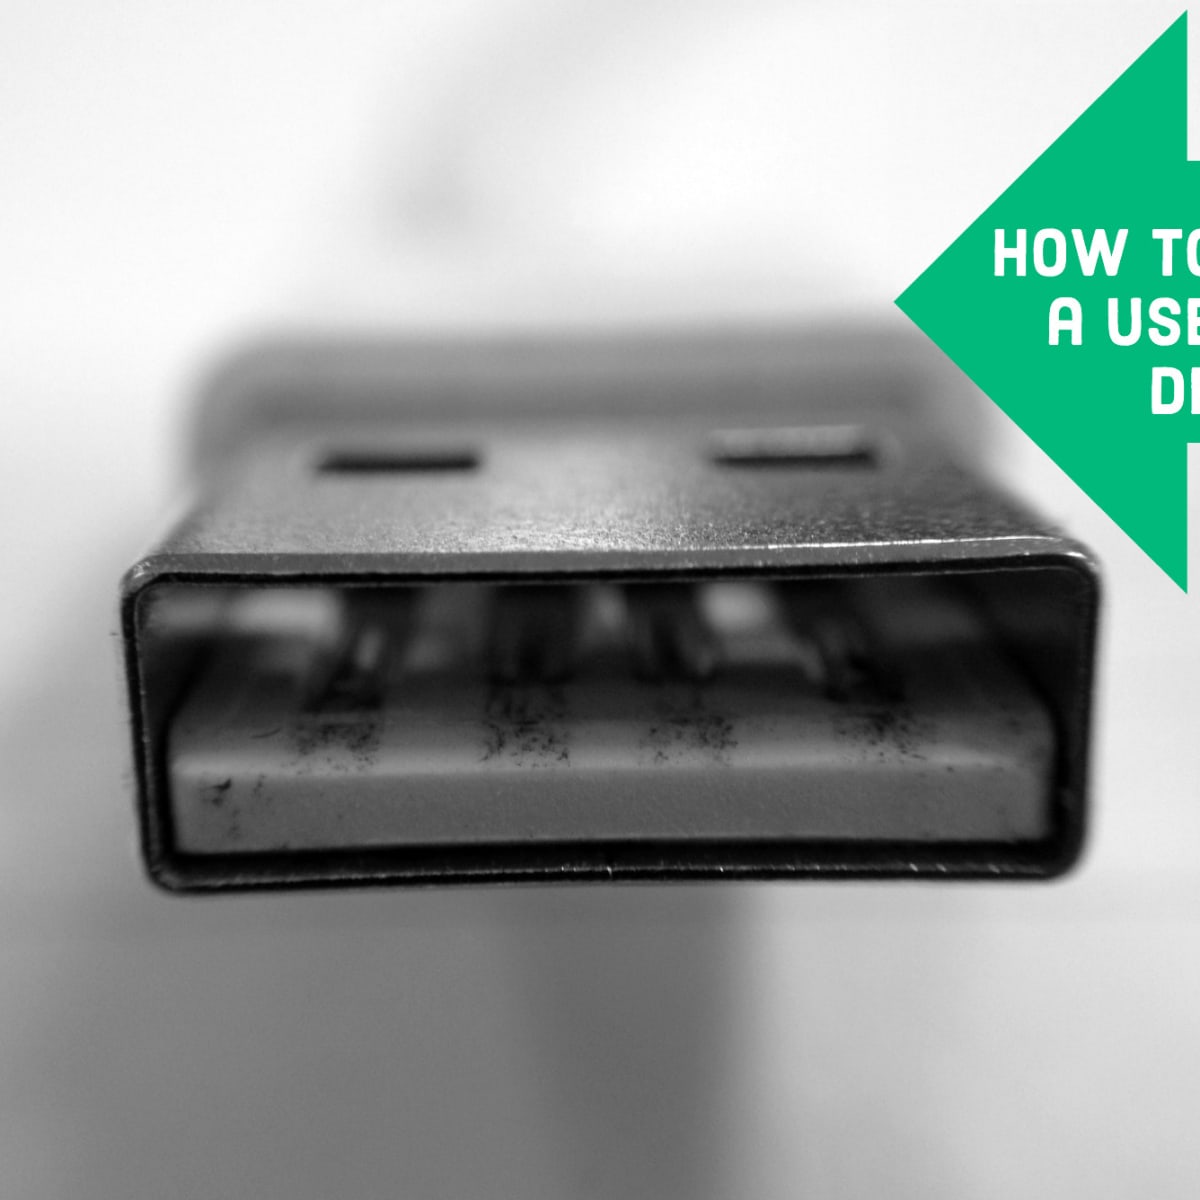 how to reformat a usb drive to fat32